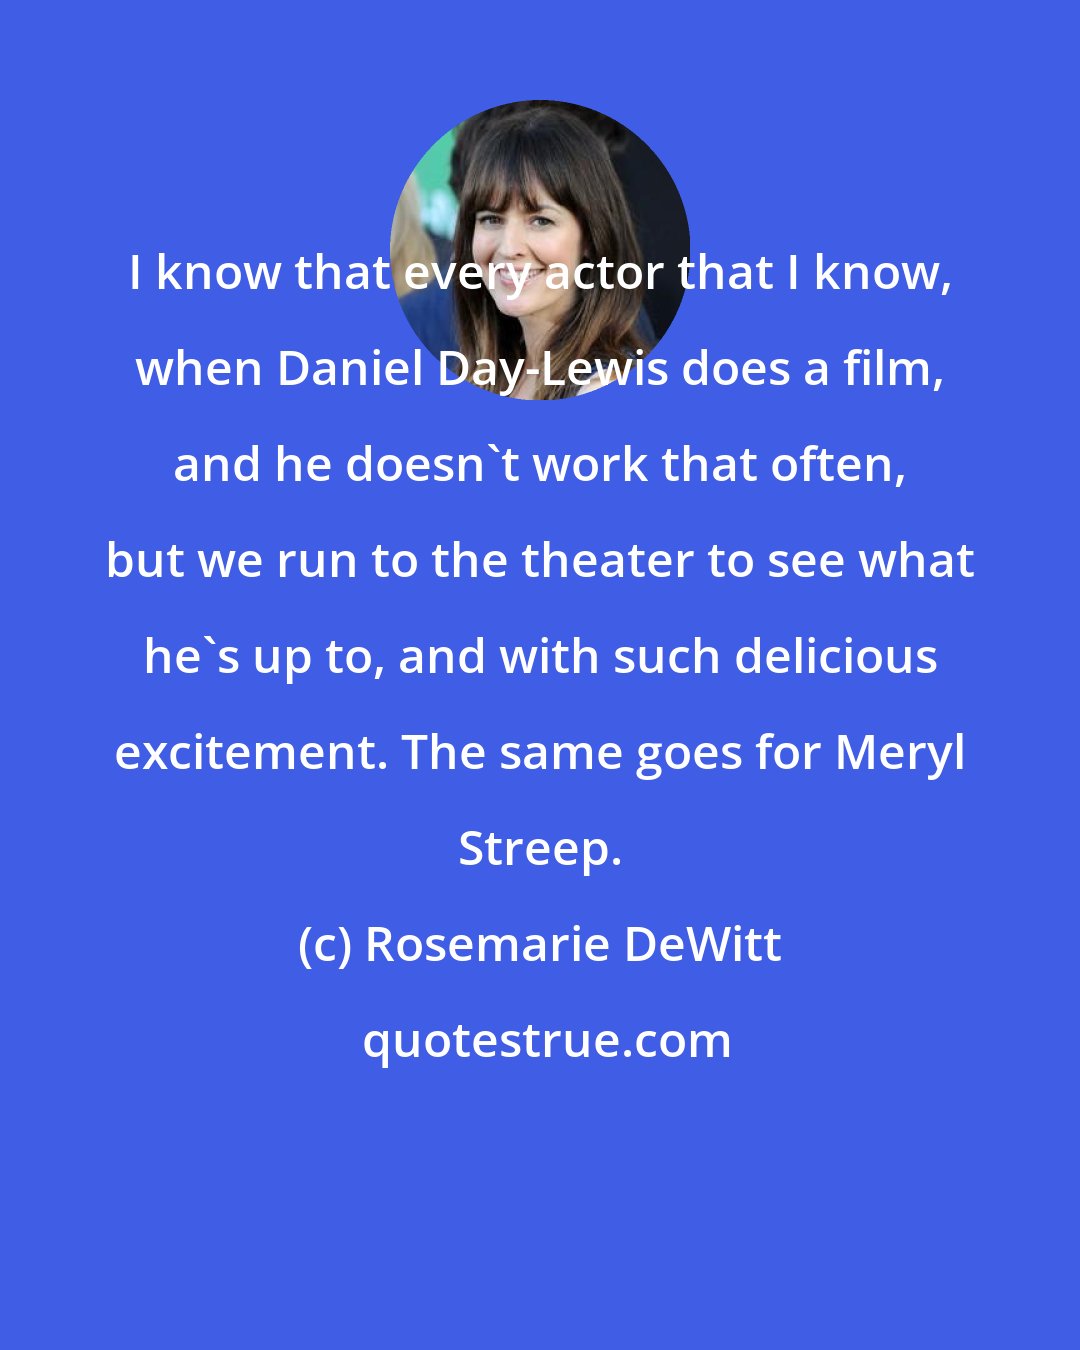 Rosemarie DeWitt: I know that every actor that I know, when Daniel Day-Lewis does a film, and he doesn't work that often, but we run to the theater to see what he's up to, and with such delicious excitement. The same goes for Meryl Streep.